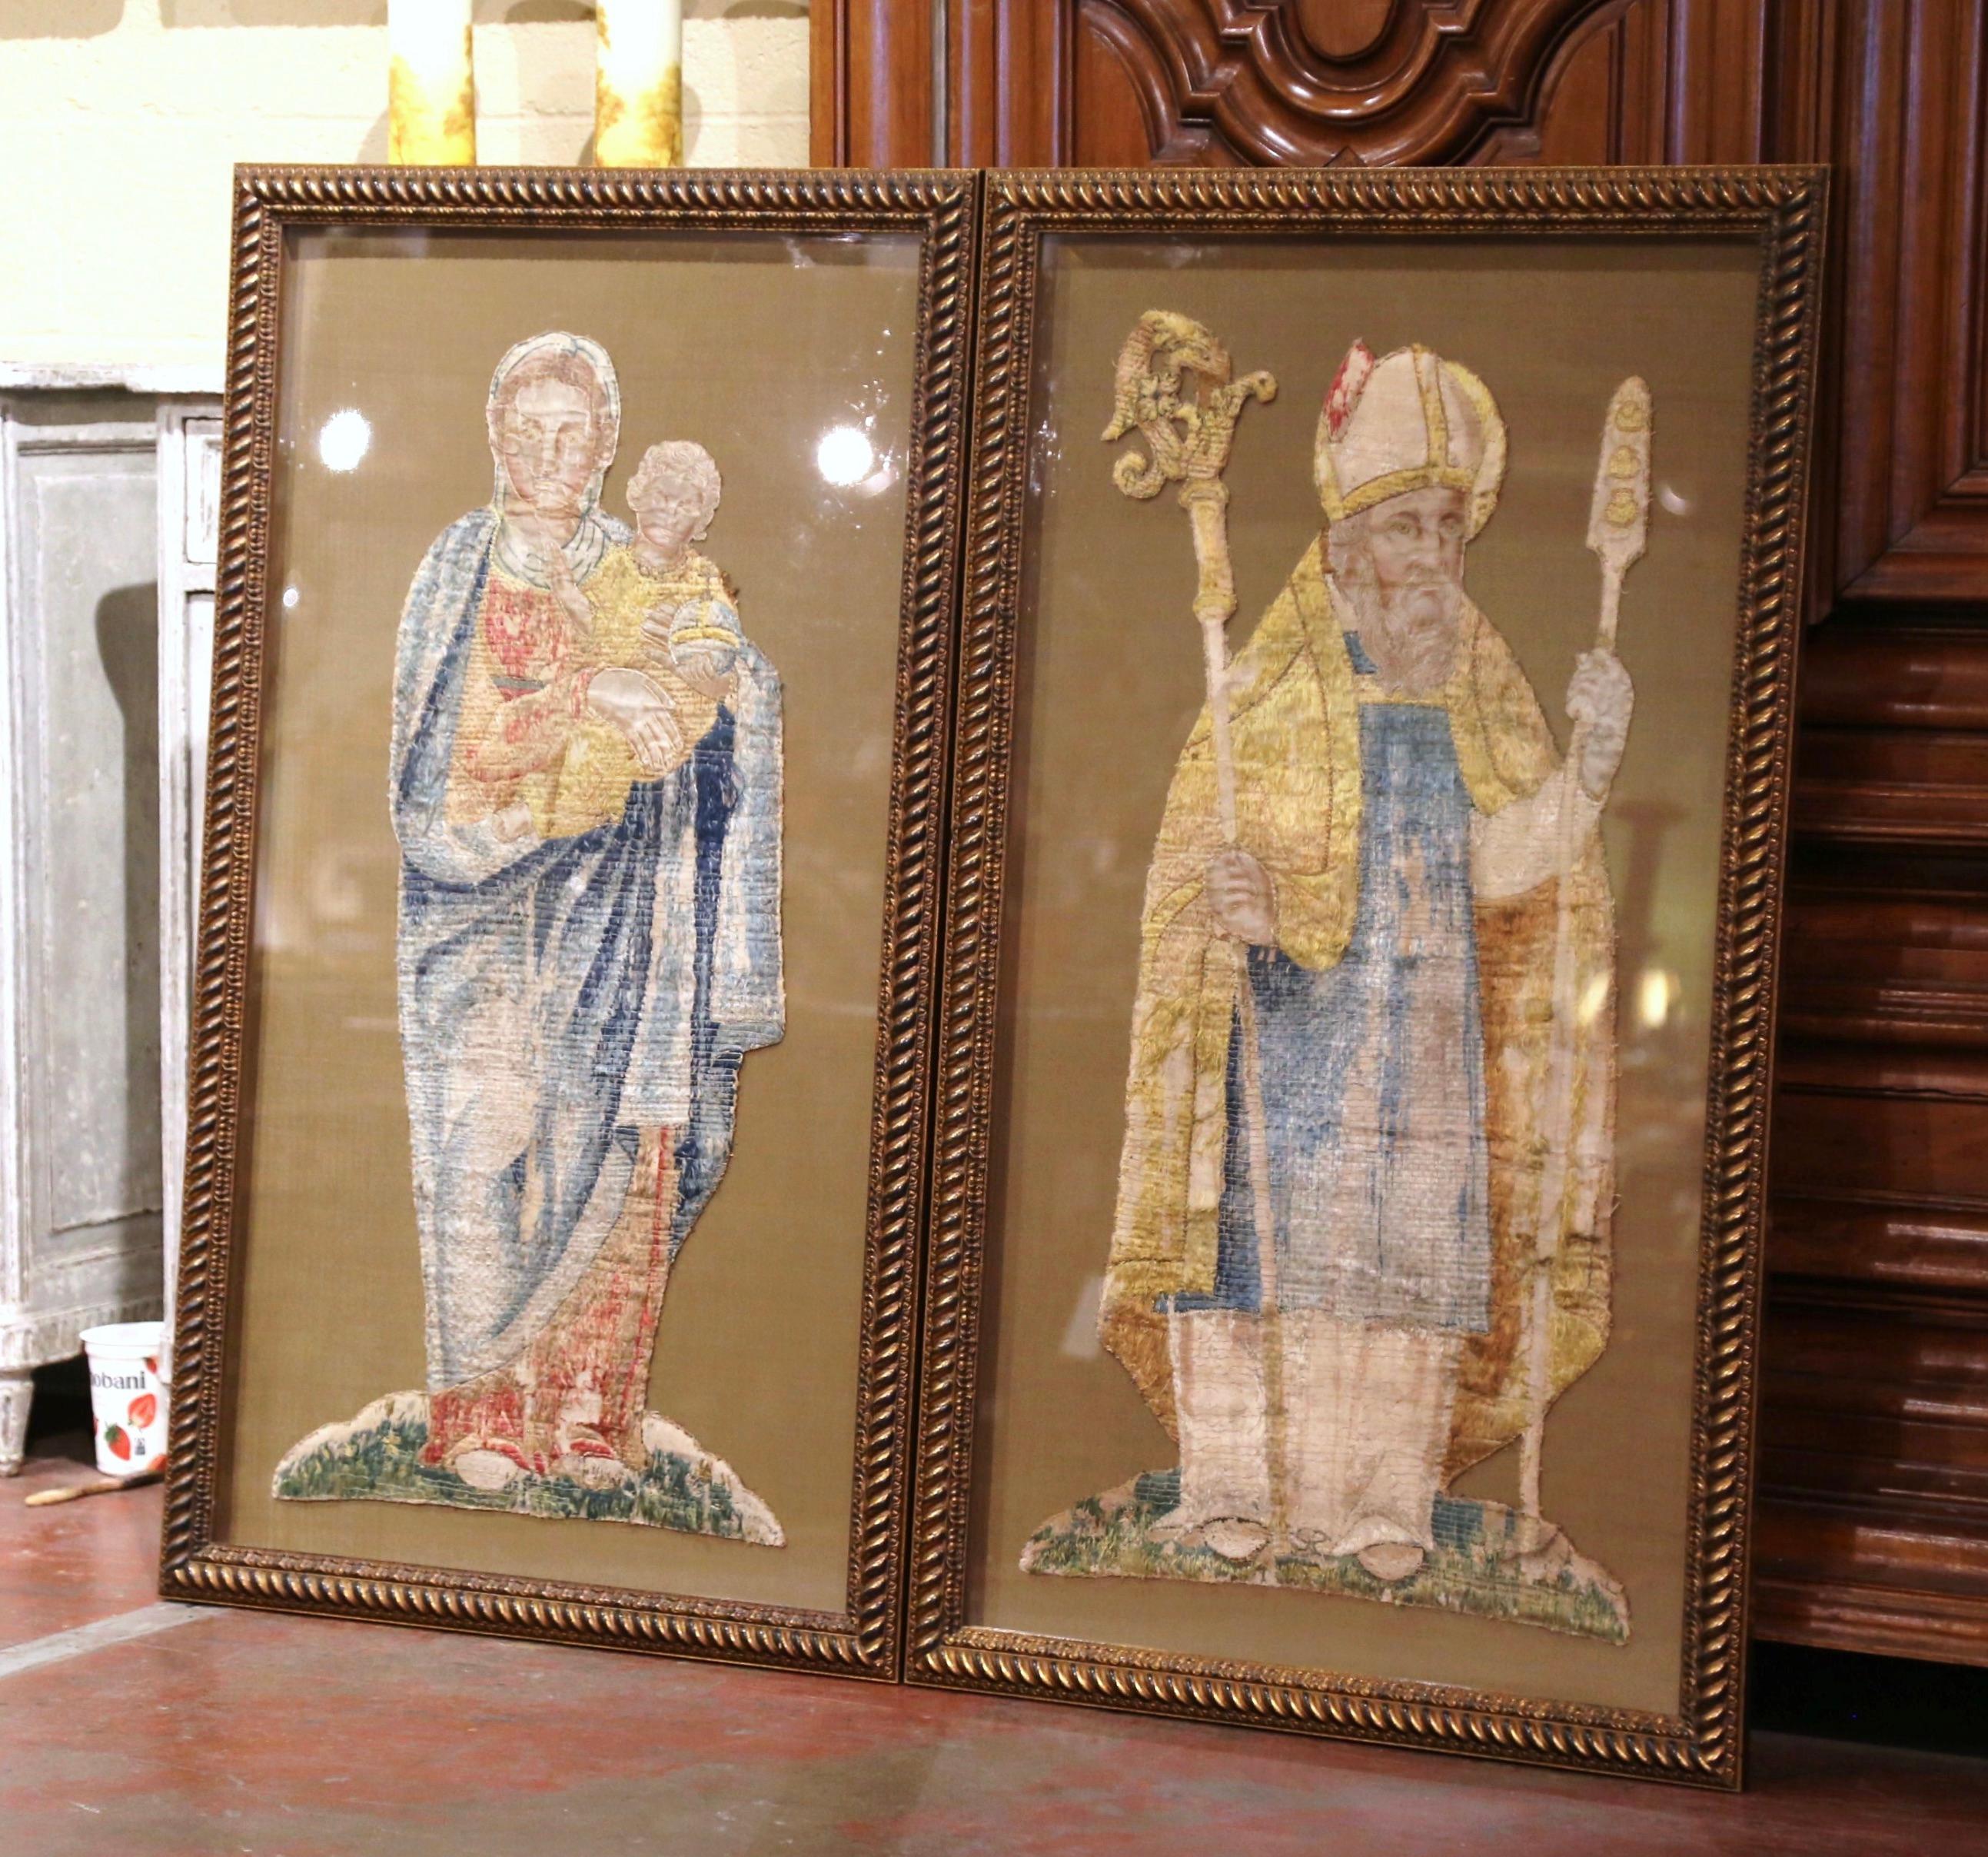 Decorate a study or hallway with this large and colorful pair of wall decor. Set a carved giltwood frame protected with glass, each panel depicts a religious figure including the Virgin Mary holding her Son Jesus Christ. The other represents a